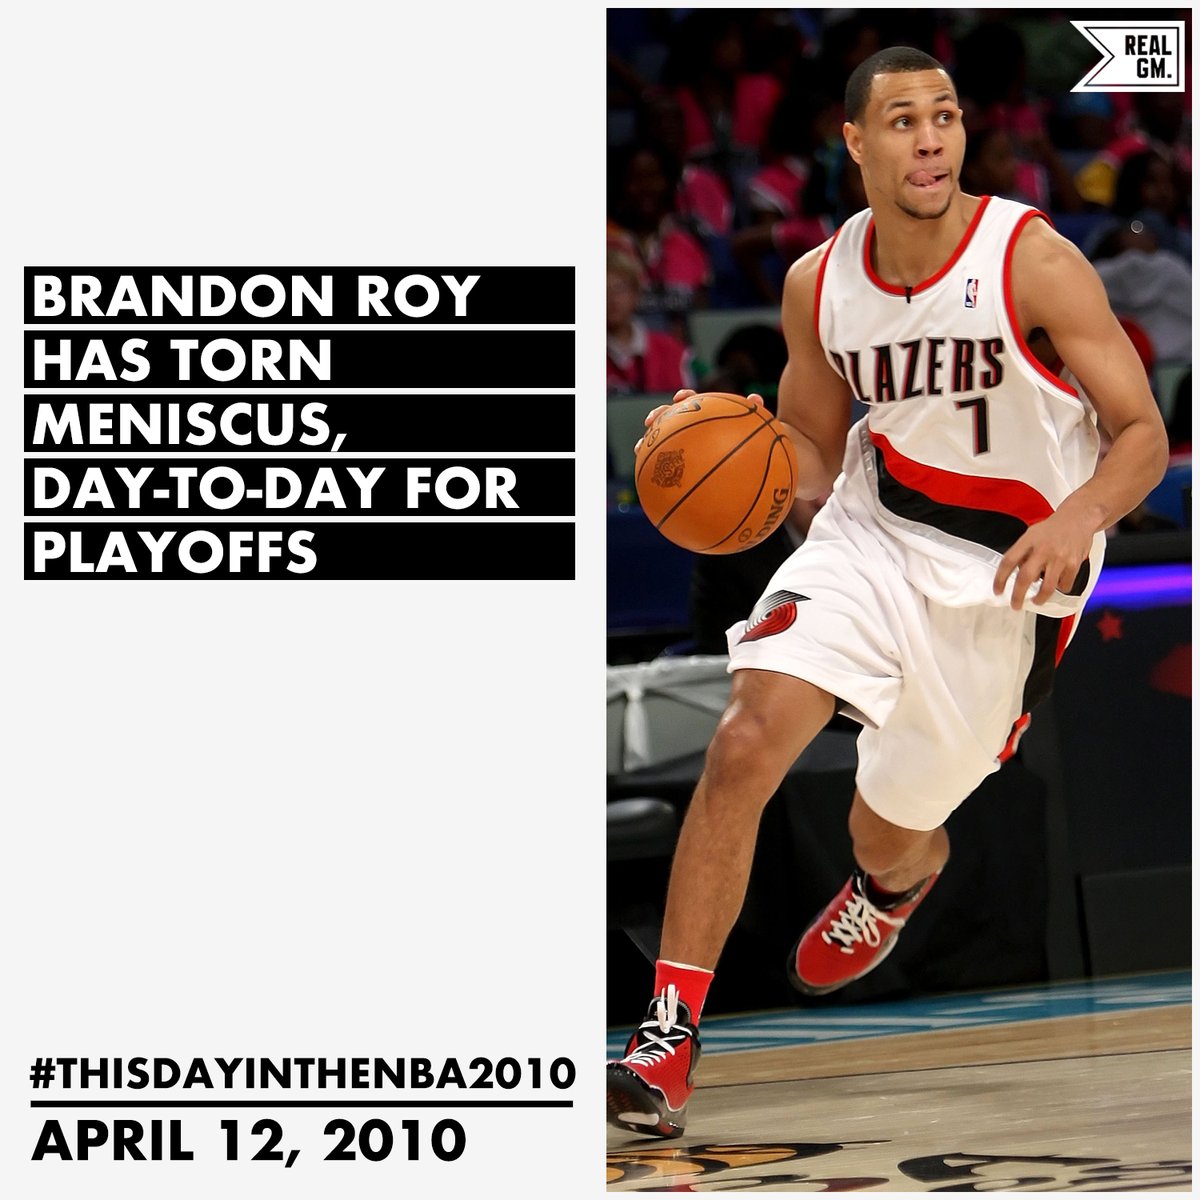  #ThisDayInTheNBA2010April 12, 2010Brandon Roy Has Torn Meniscus, Day-To-Day For Playoffs https://basketball.realgm.com/wiretap/203253/Brandon-Roy-Has-Torn-Meniscus-Day-To-Day-For-Playoffs